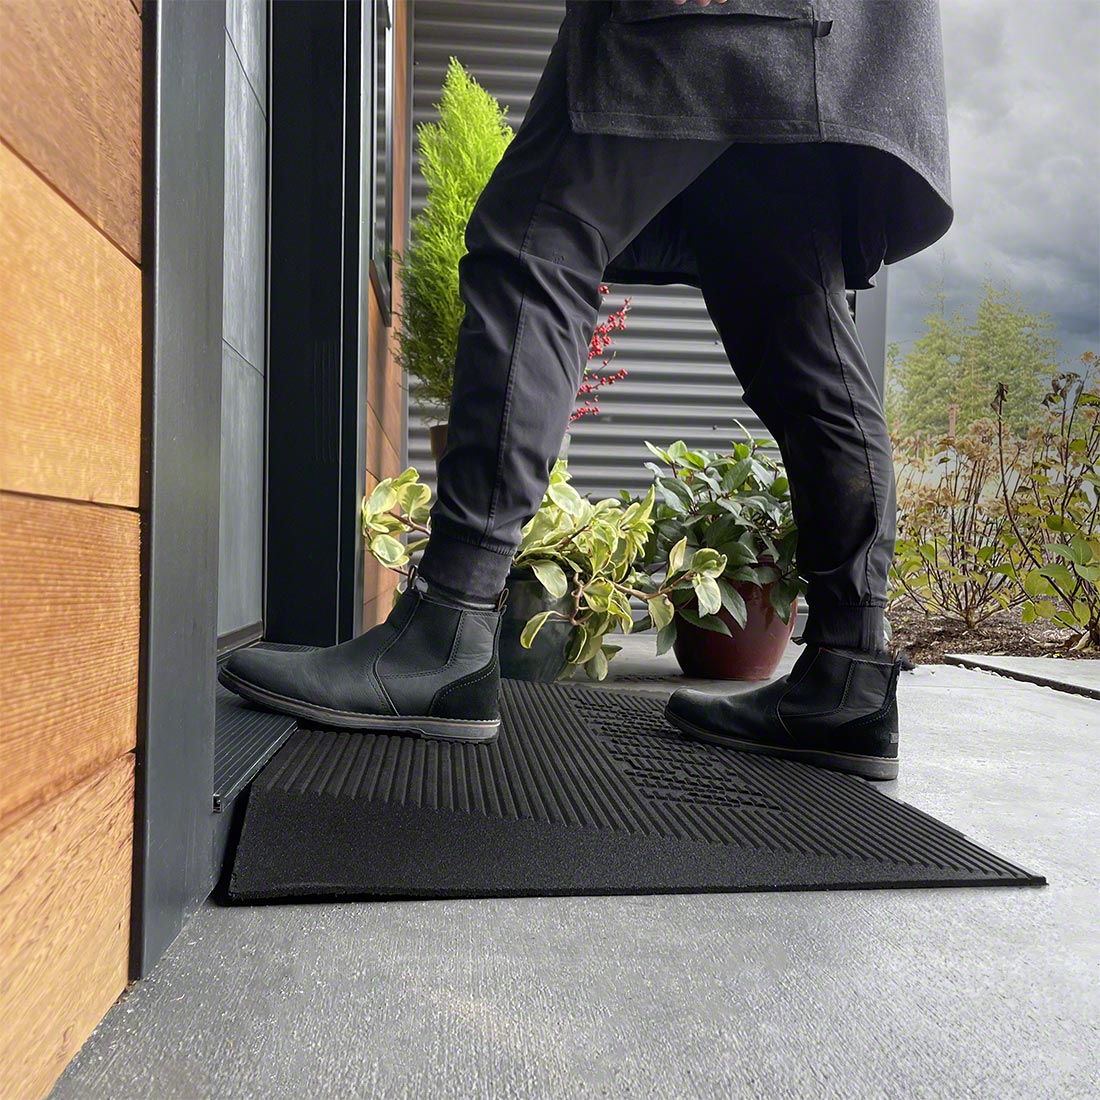 2.5 H Gray EZ-ACCESS Transitions Angled Entry Mat